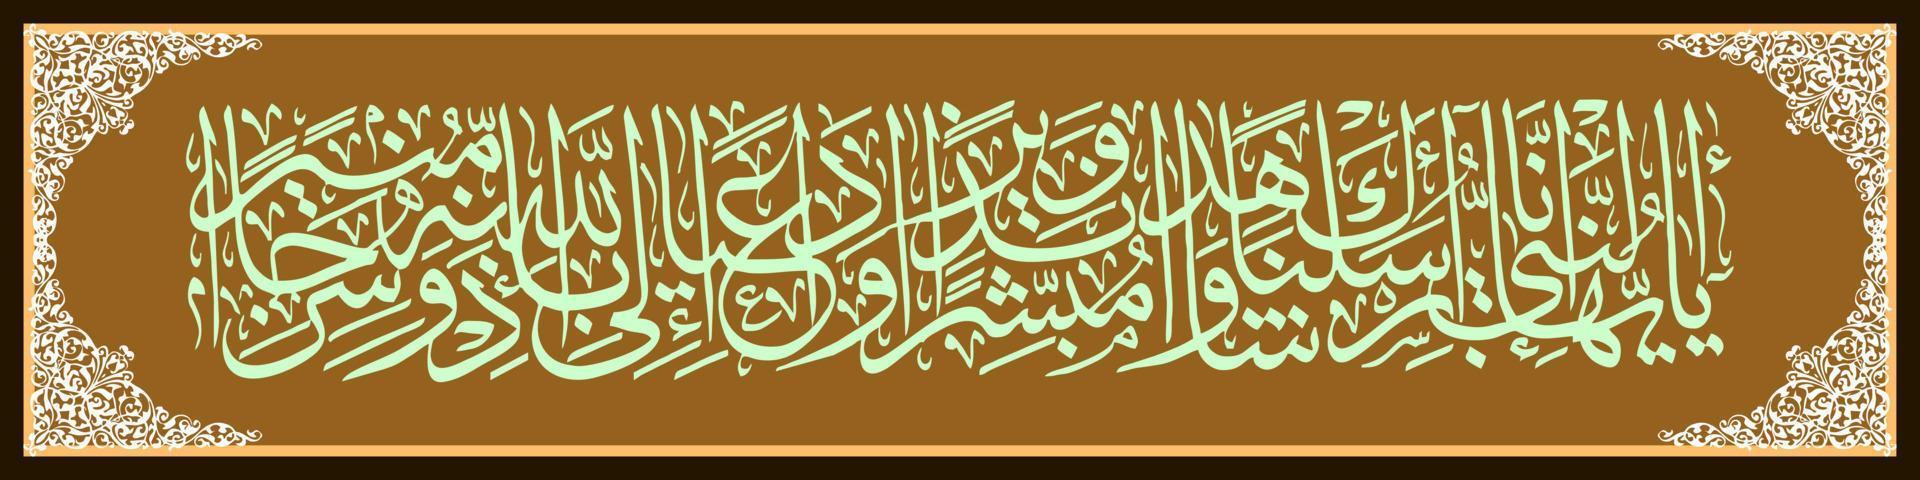 Arabic calligraphy Al Quran SUrah Al Ahzab 45 46, translation O Prophet Indeed, We have sent you to be a witness, bringer of good news and warner O Prophet Verily, We have sent you to be a witness, vector